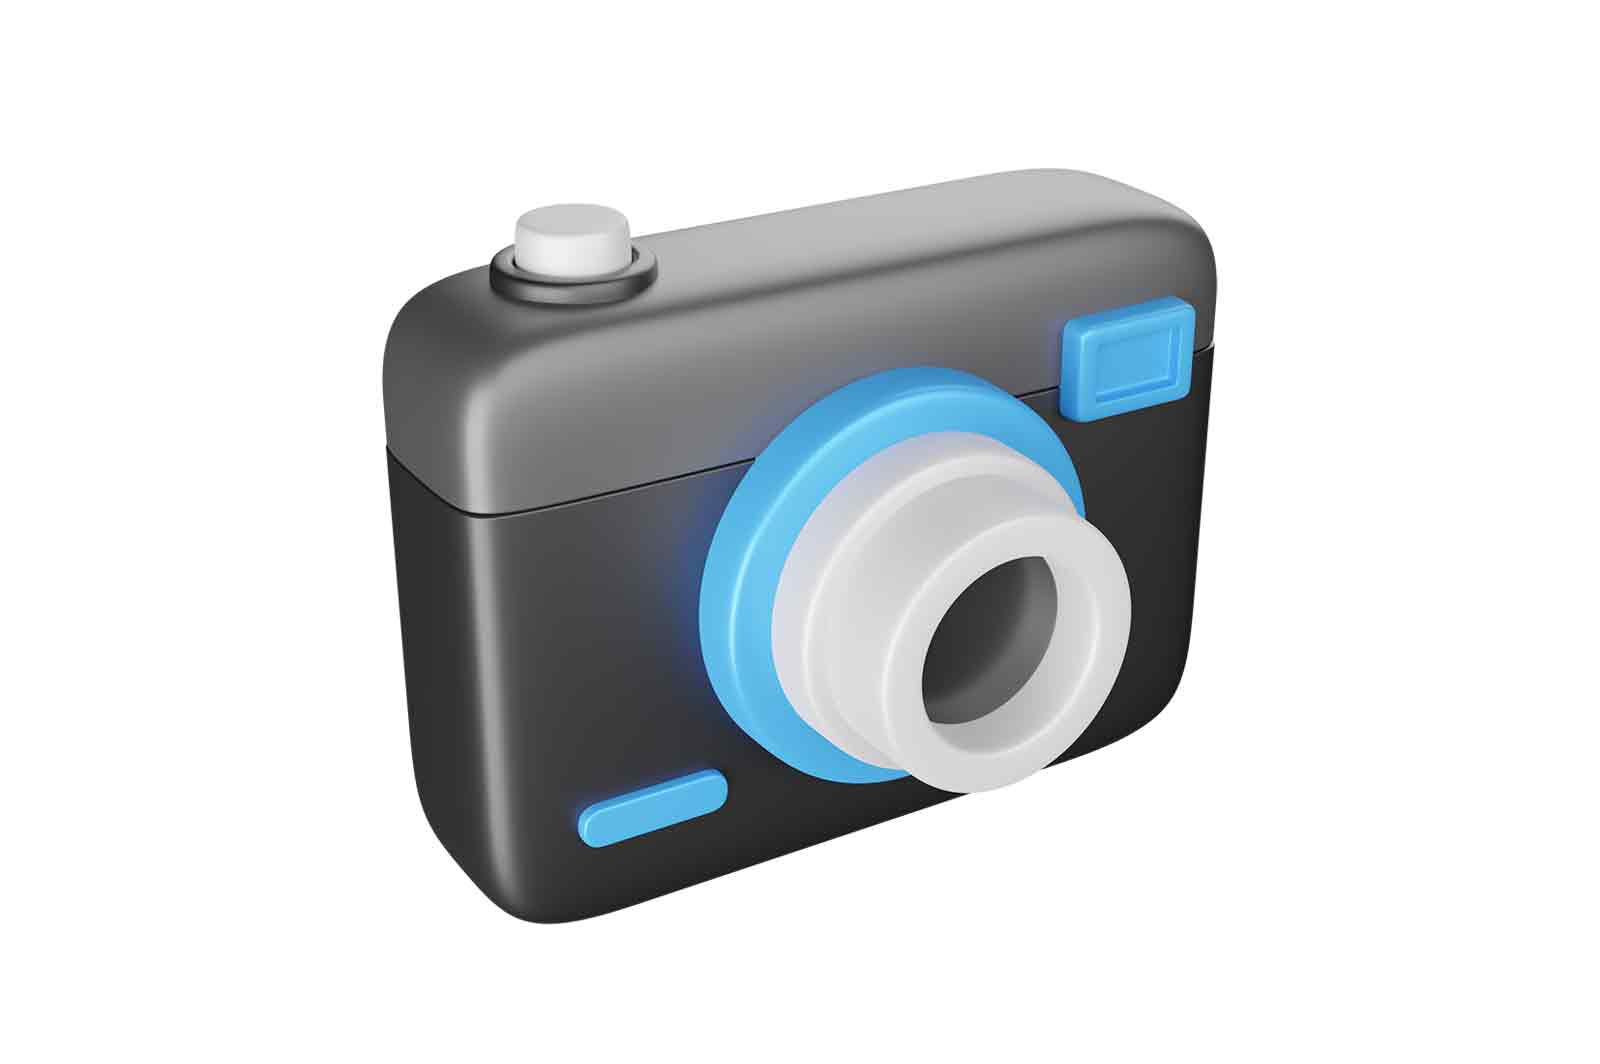 Photo camera with with lens and button 3d rendered icon illustration. Digital device. Technology and photography concept